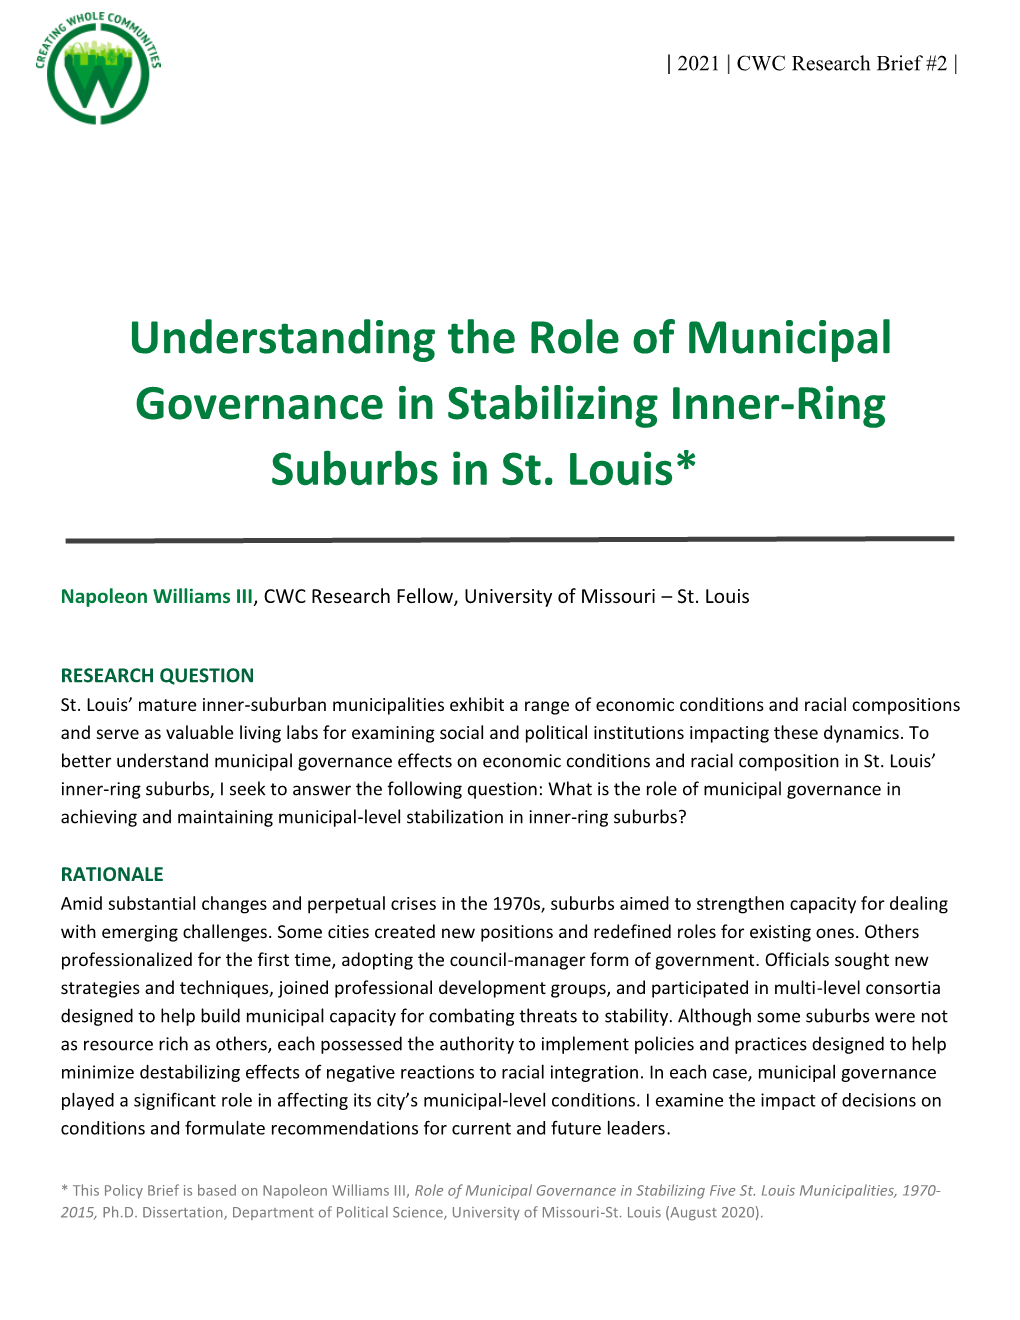 Understanding the Role of Municipal Governance in Stabilizing Inner-Ring Suburbs in St